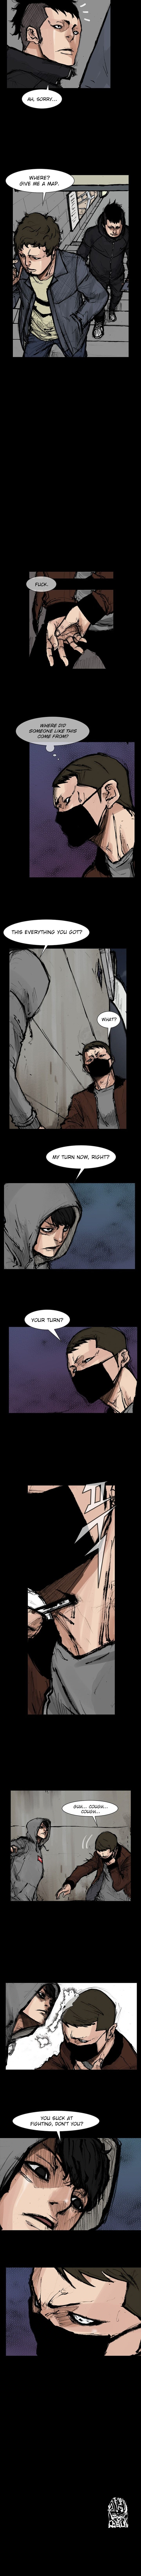 Dokgo 2 Chapter 64 Page 6